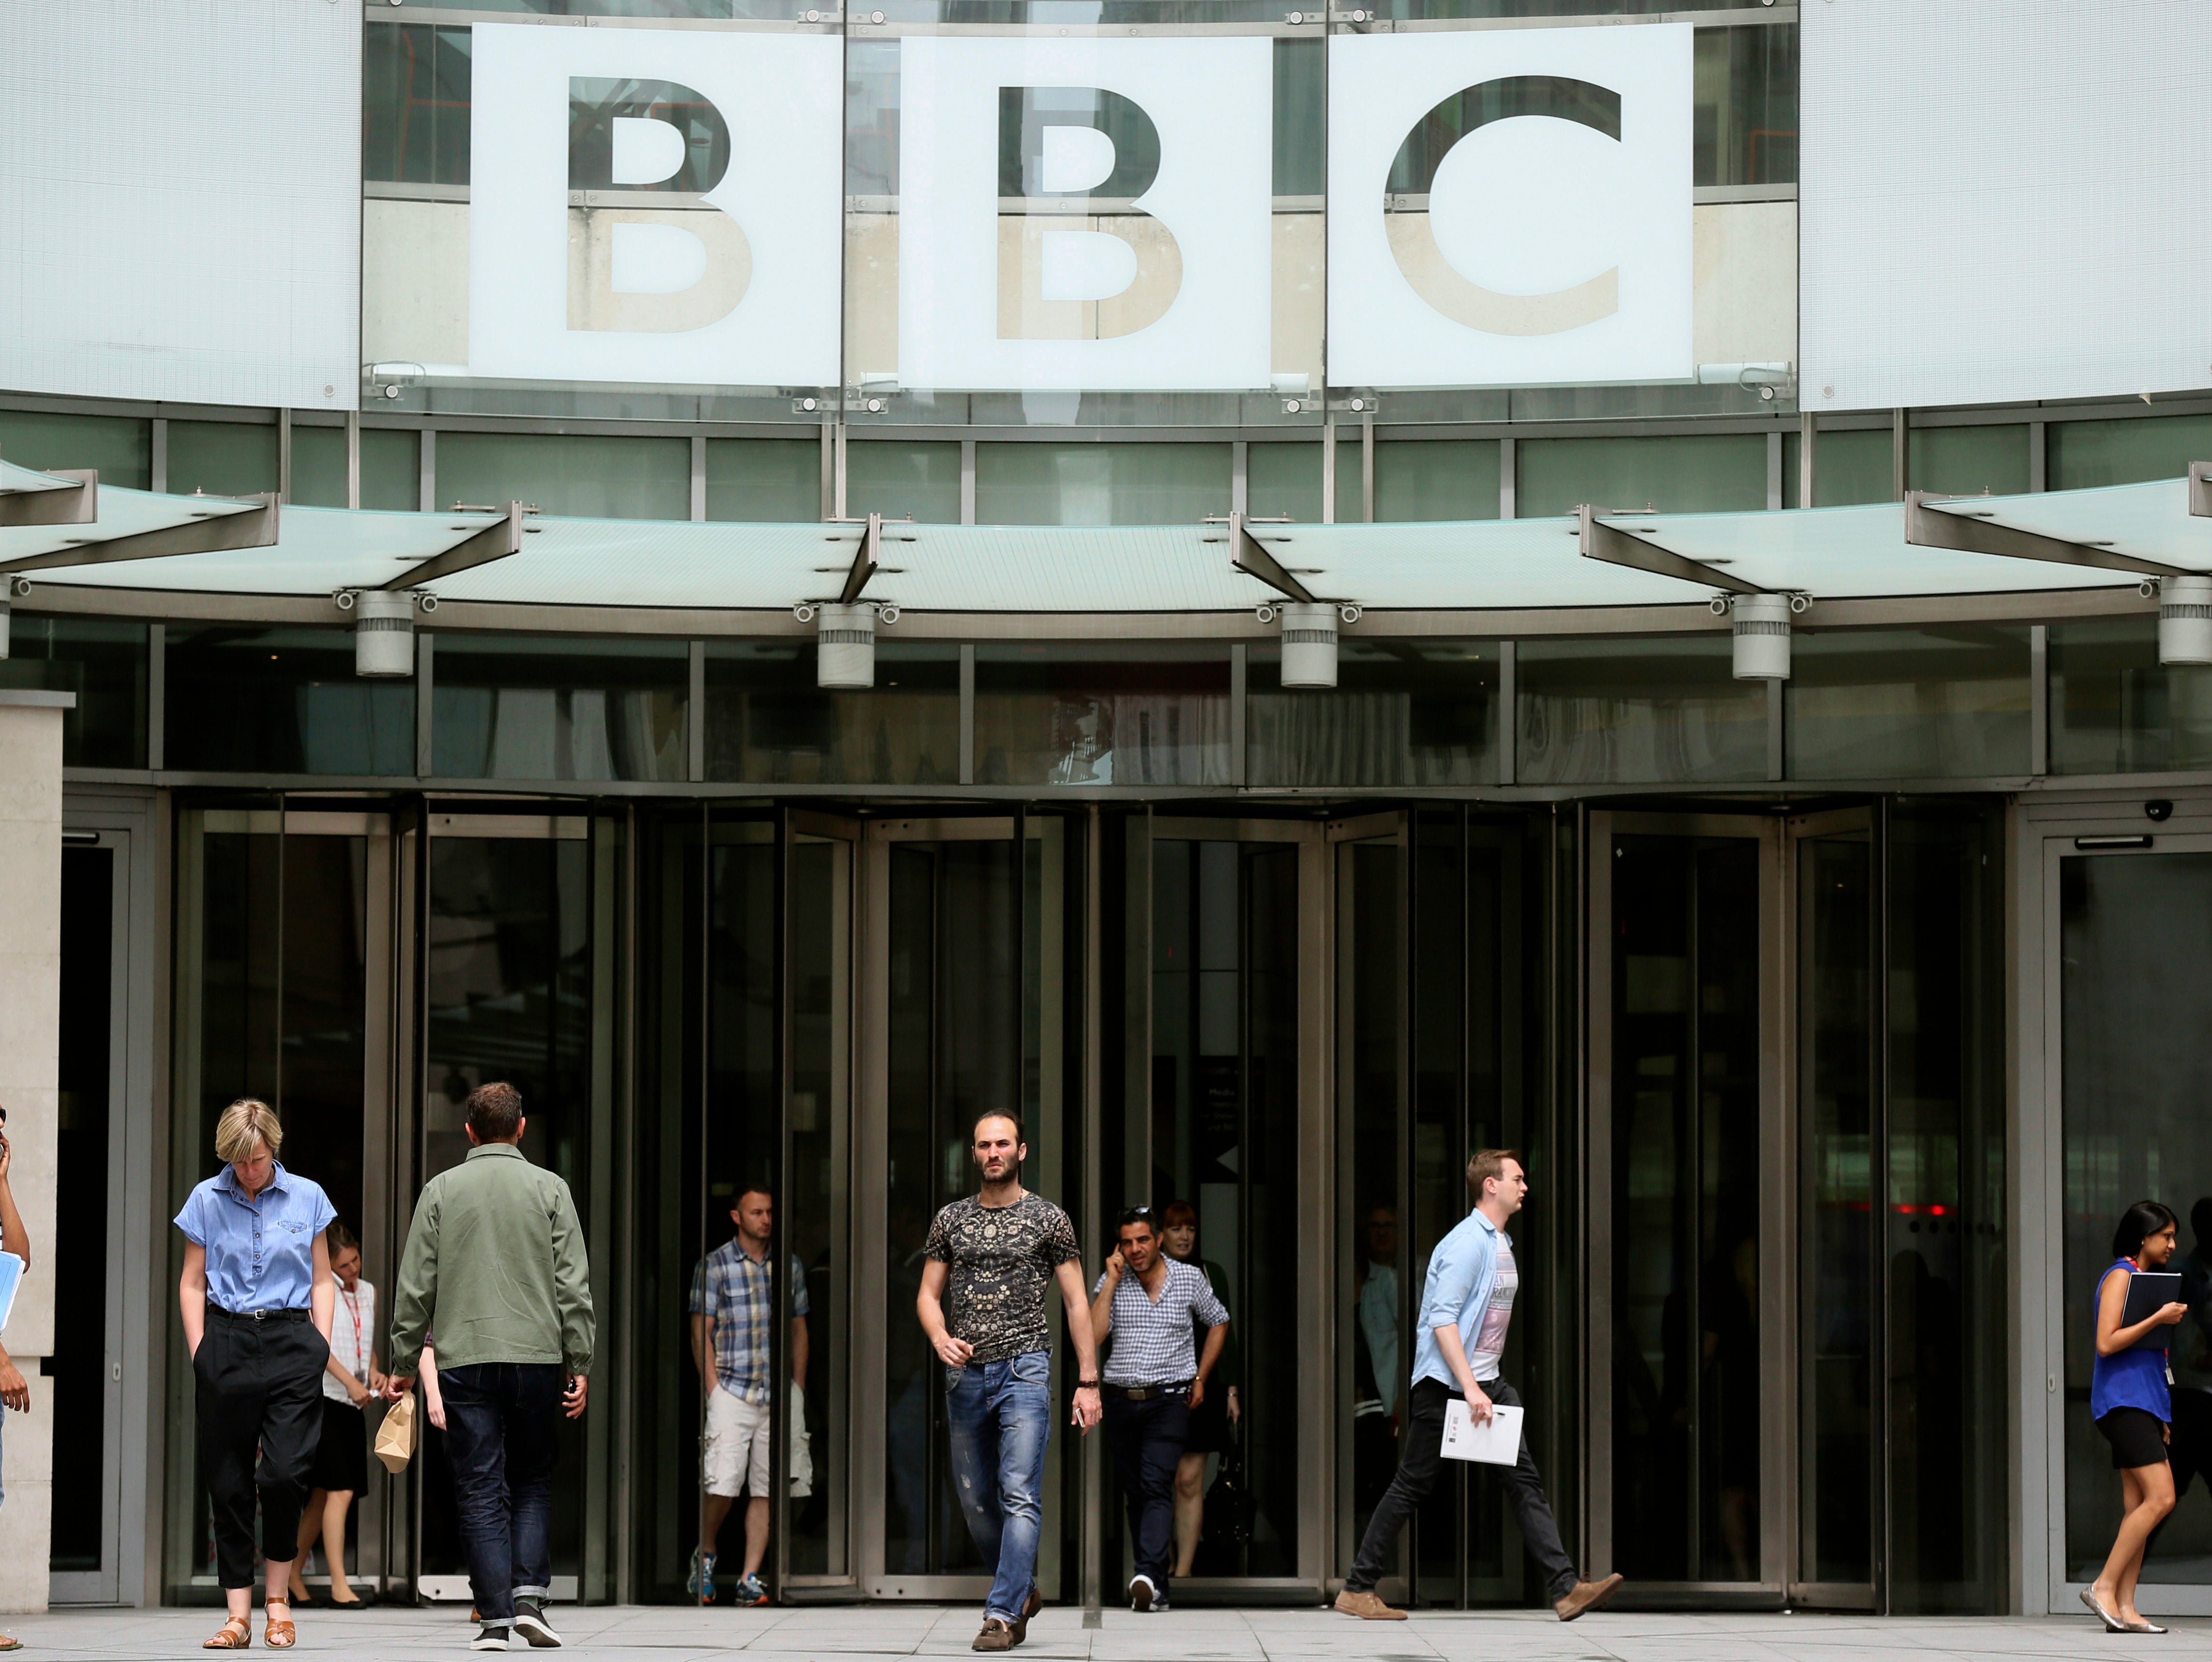 Guest blog: BBC news bias has been, if anything, against Europe and in favour of big business